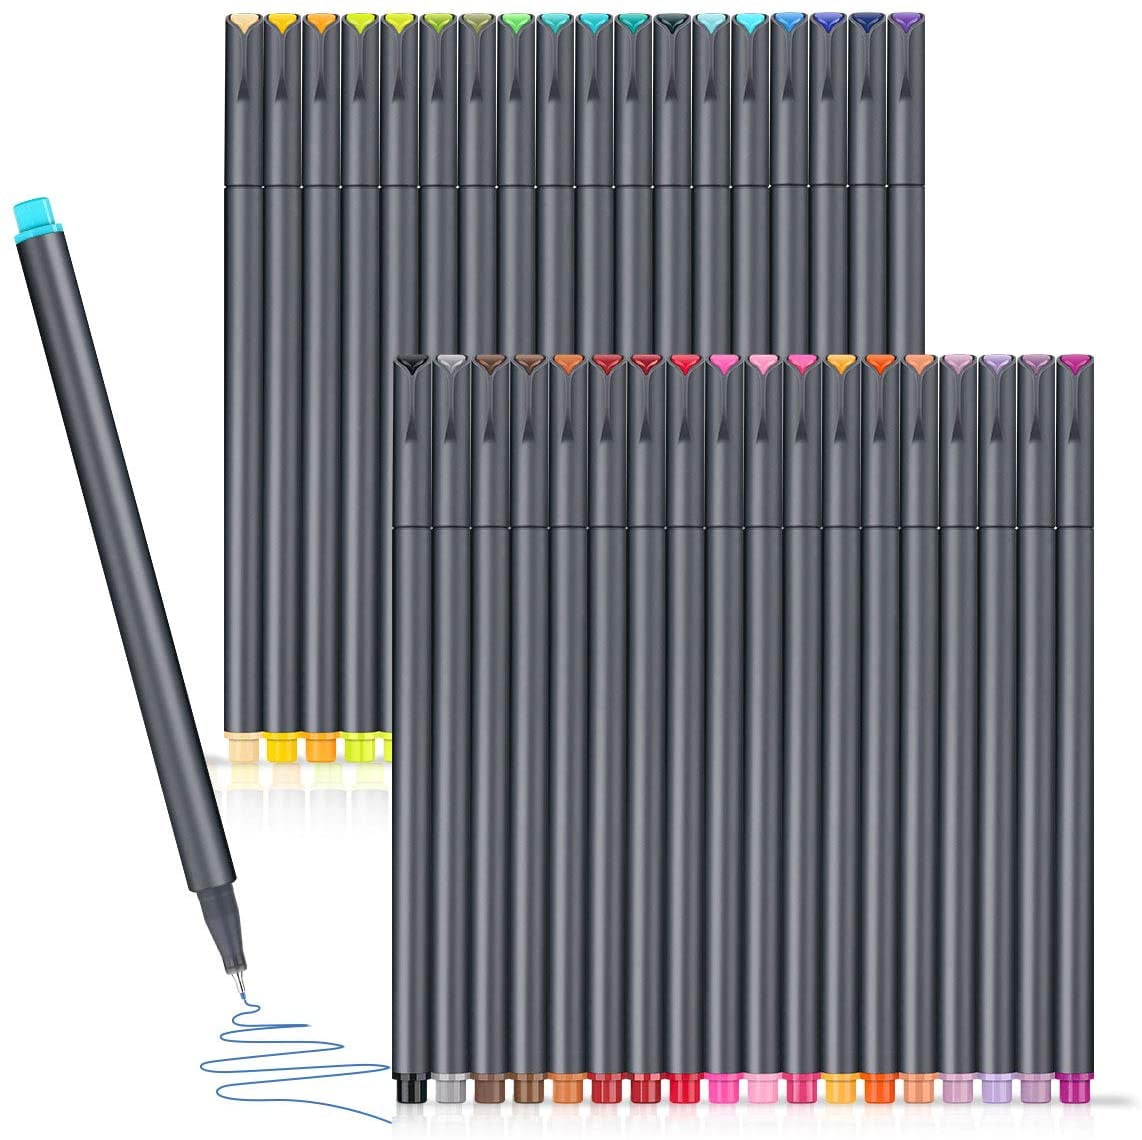 for Journal Planner Note Taking and vividly Fine Point Fineliner Markers Drawing Marker Pens,Porous-Point Pens,Line Colored Sketch Writing Drawing Pens goodshare 36 Colors Journal Planner Pens 